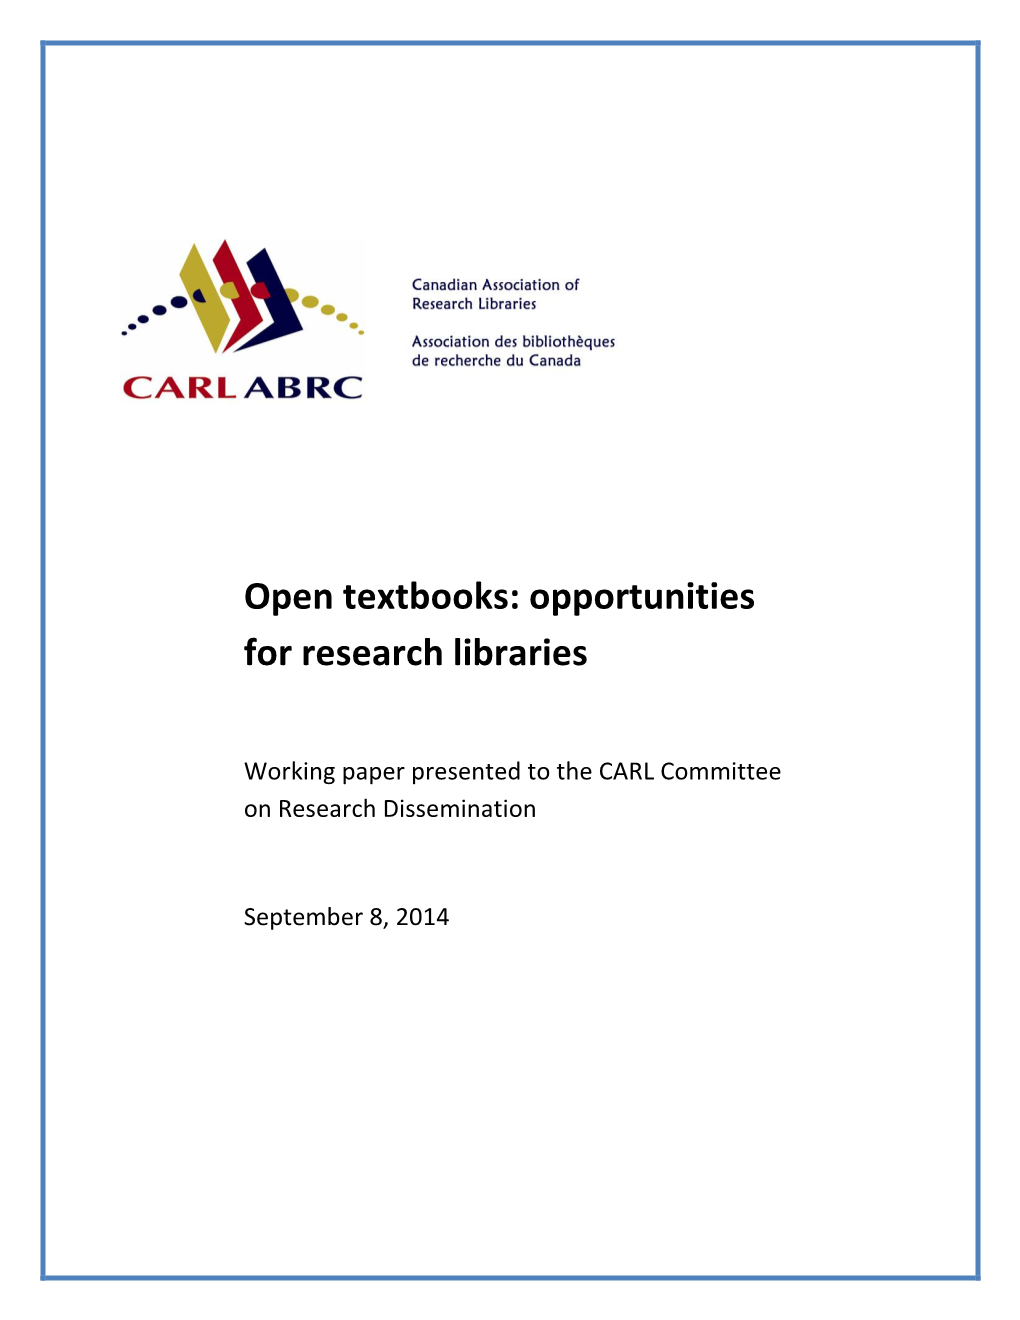 Open Textbooks: Opportunities for Research Libraries